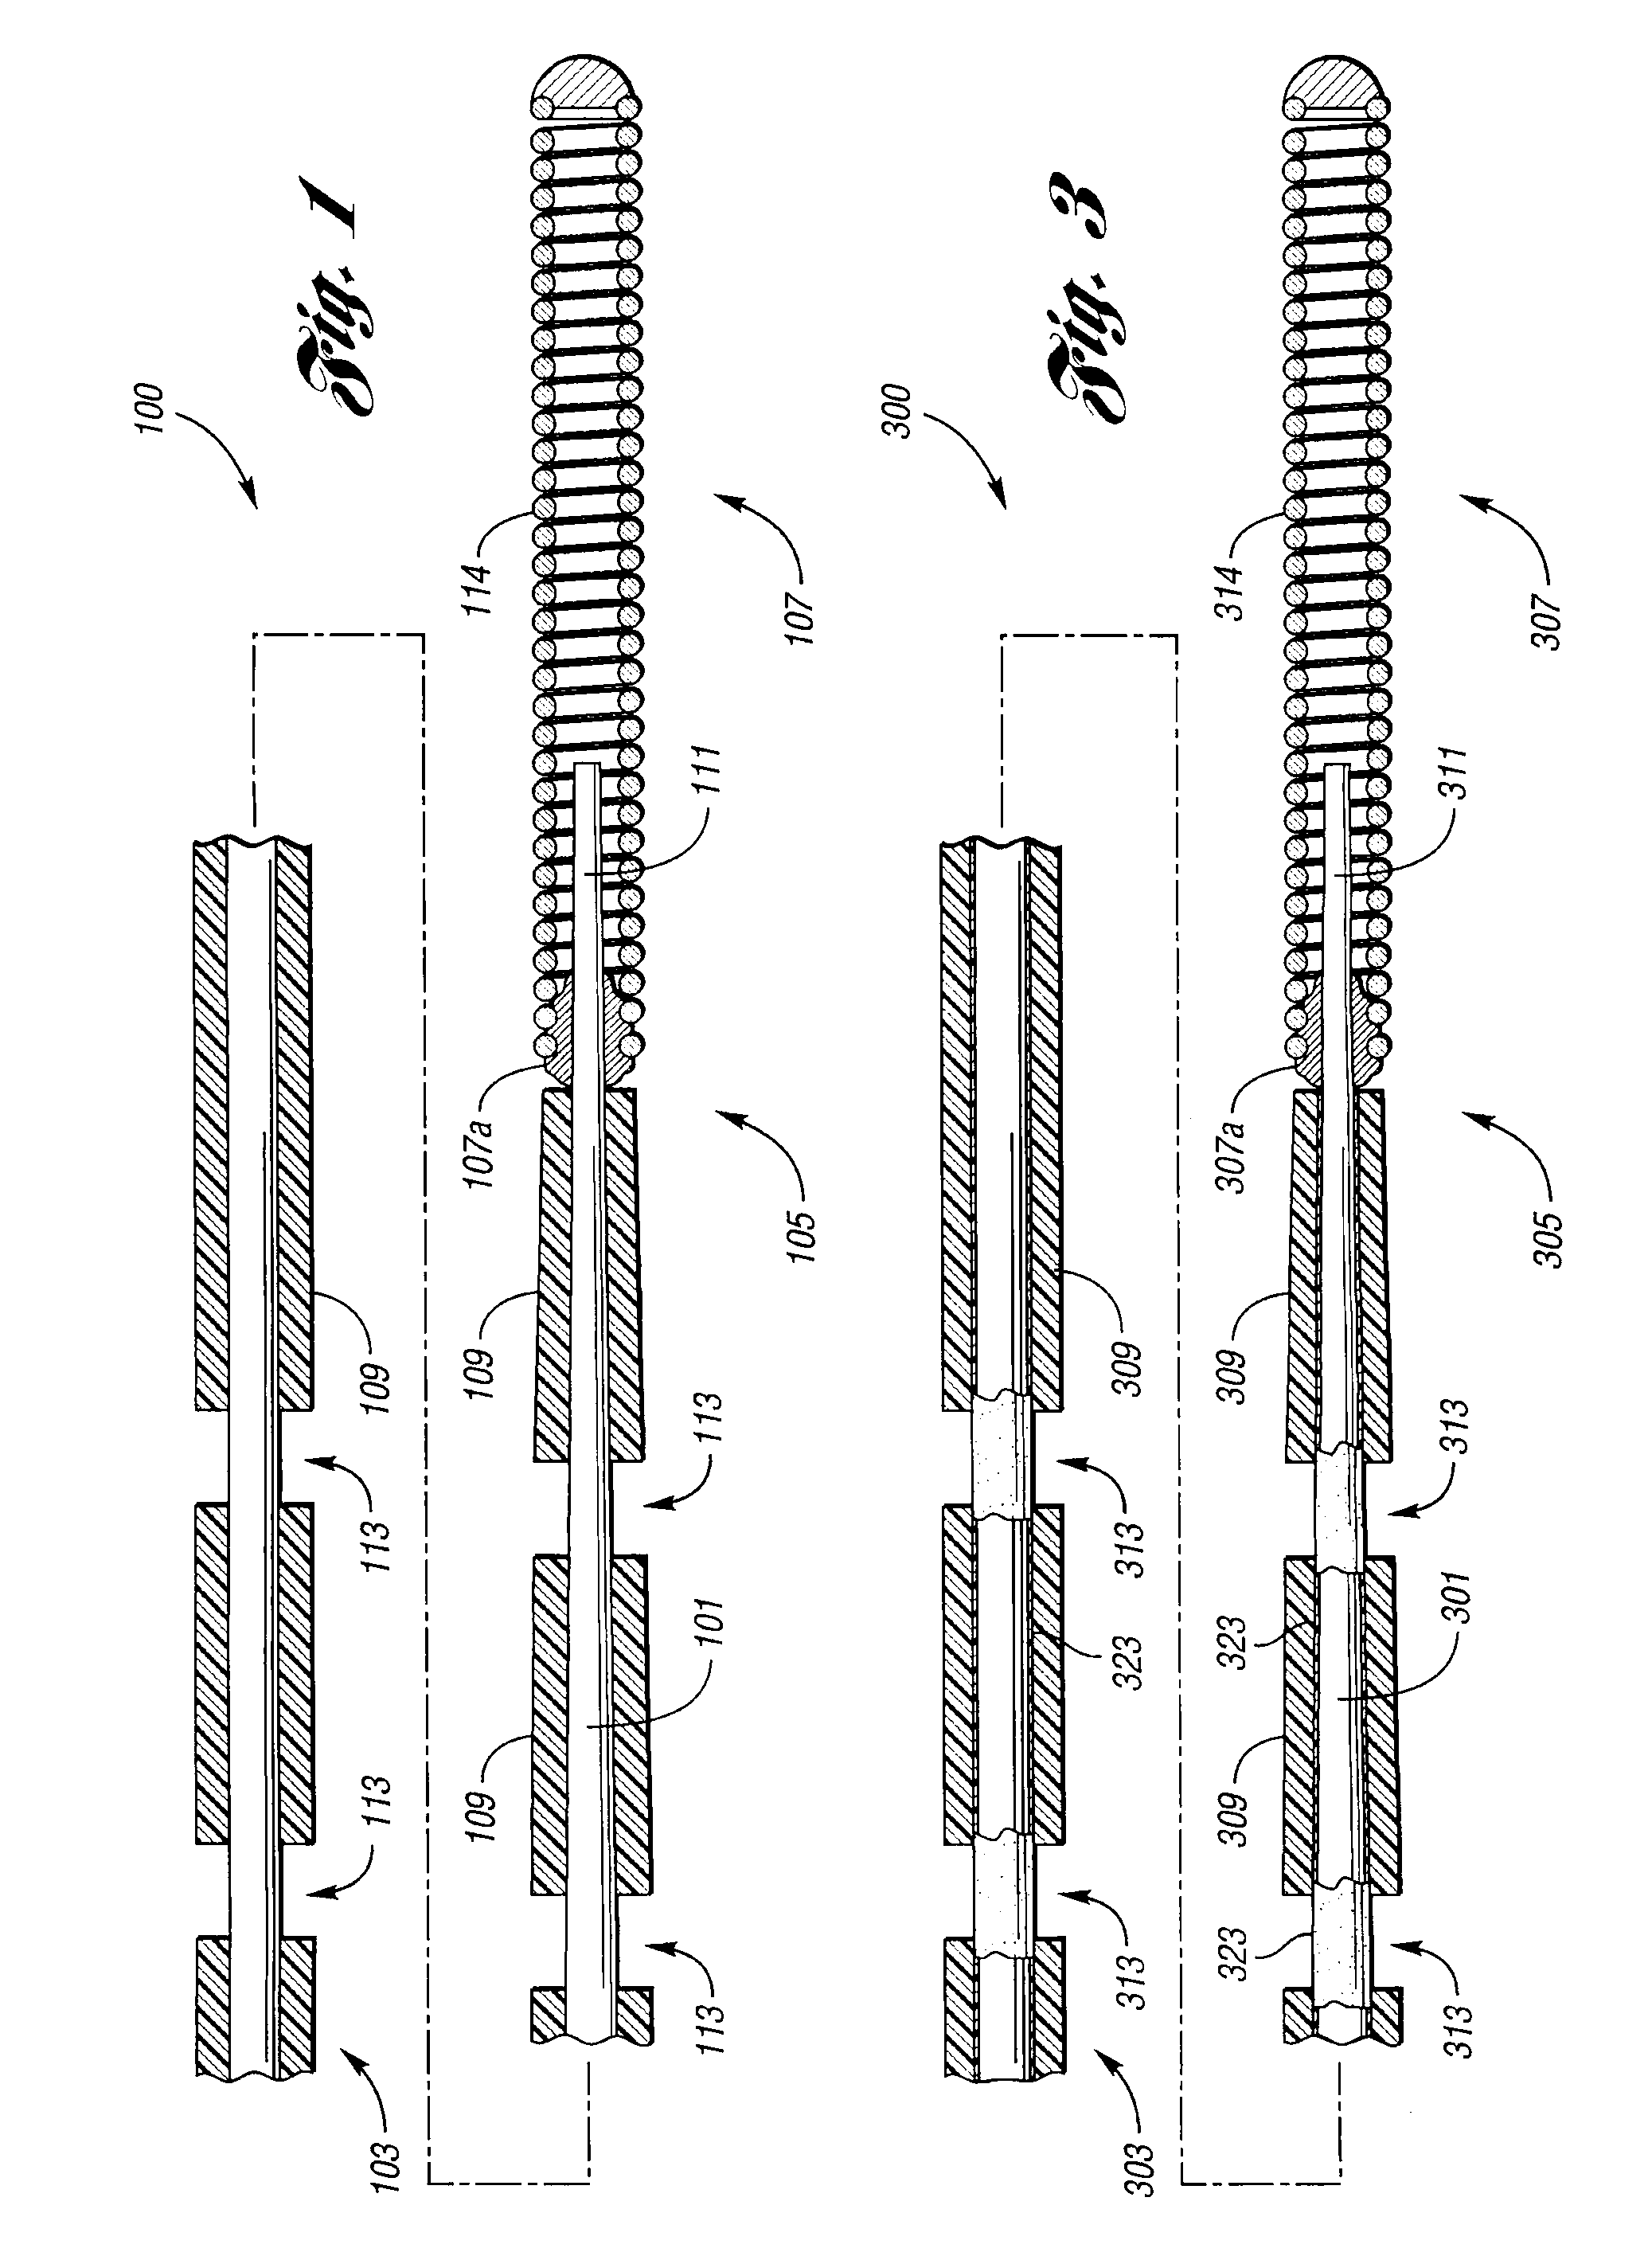 Low friction coated marked wire guide for over the wire insertion of a catheter